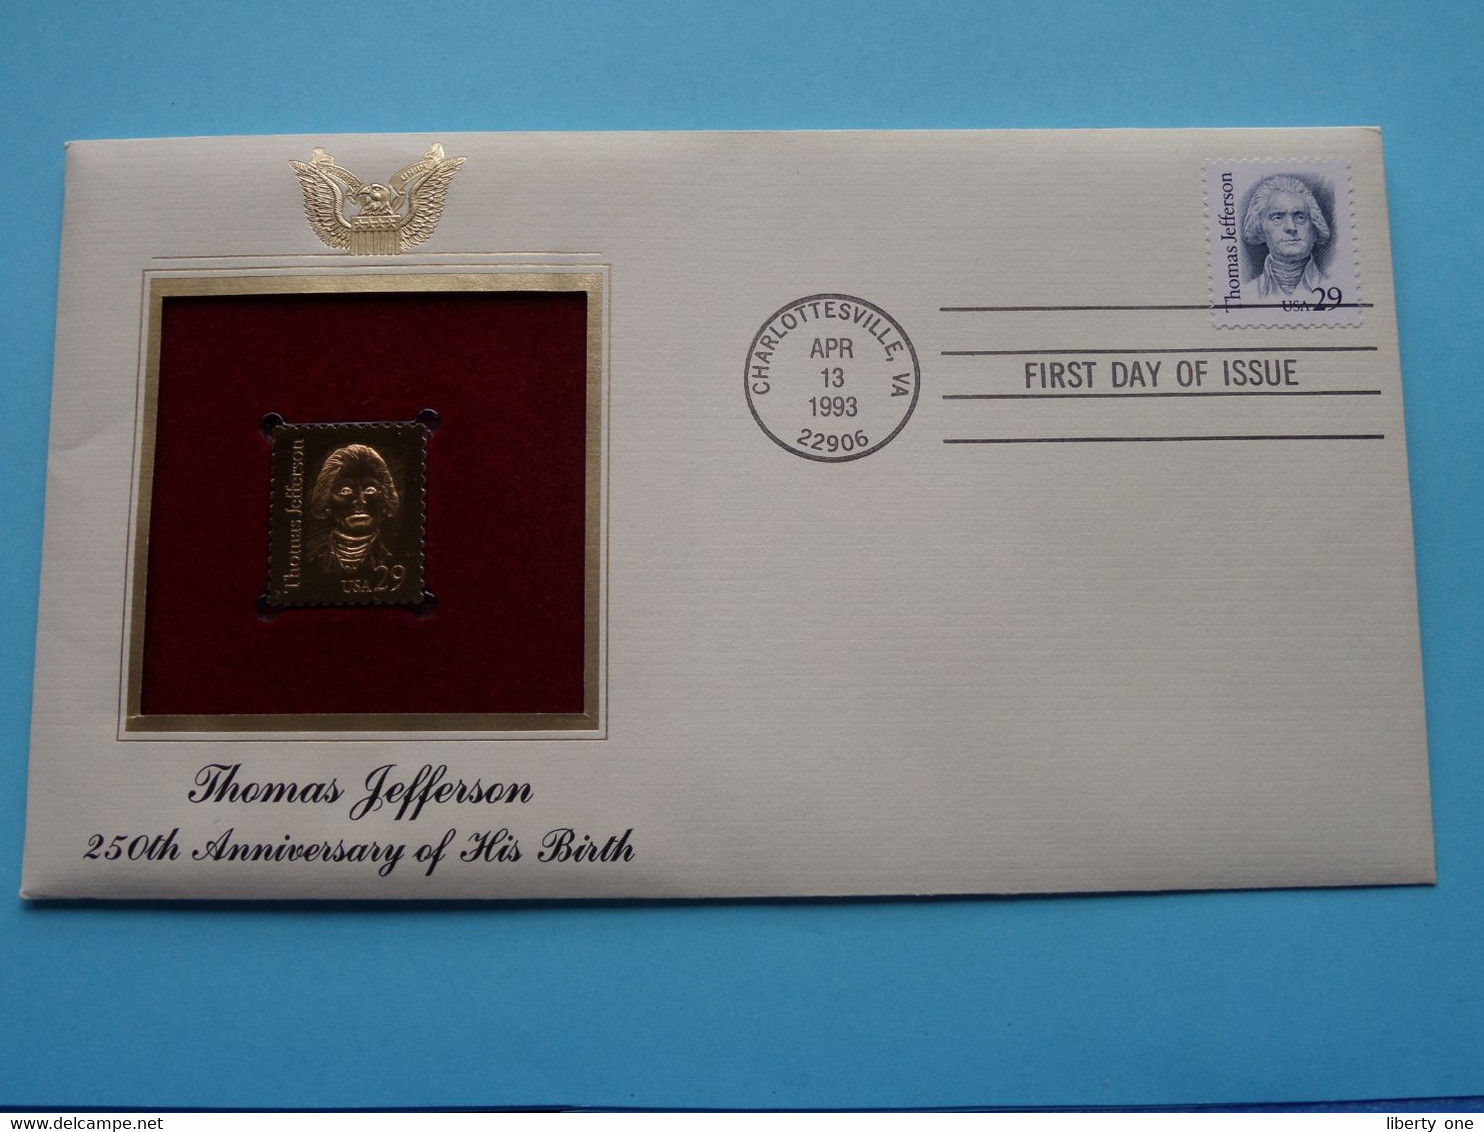 THOMAS JEFFERSON - 250th ANN. OF HIS BIRTH ( 22kt Gold Stamp Replica ) First Day Of Issue 1993 - USA ! - 1991-2000